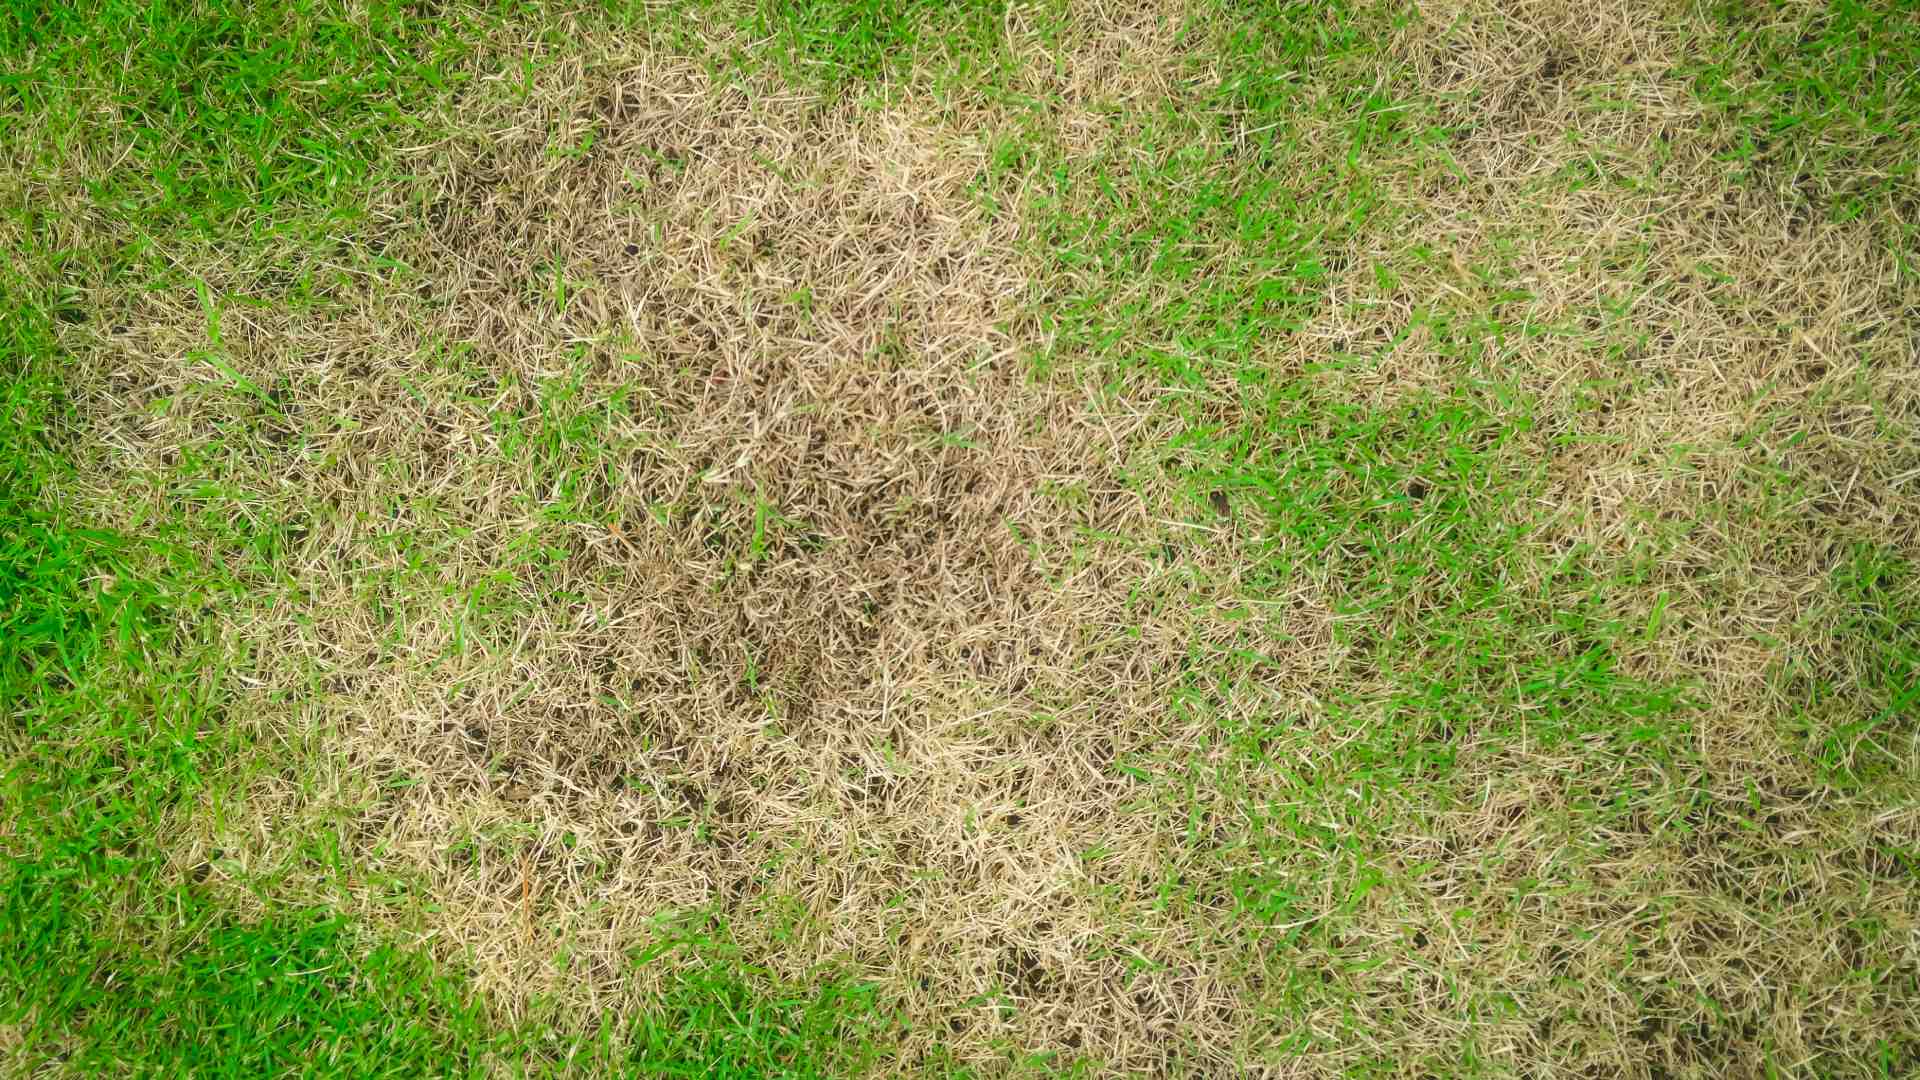 Infected lawn with brown patch disease in Plano, TX.